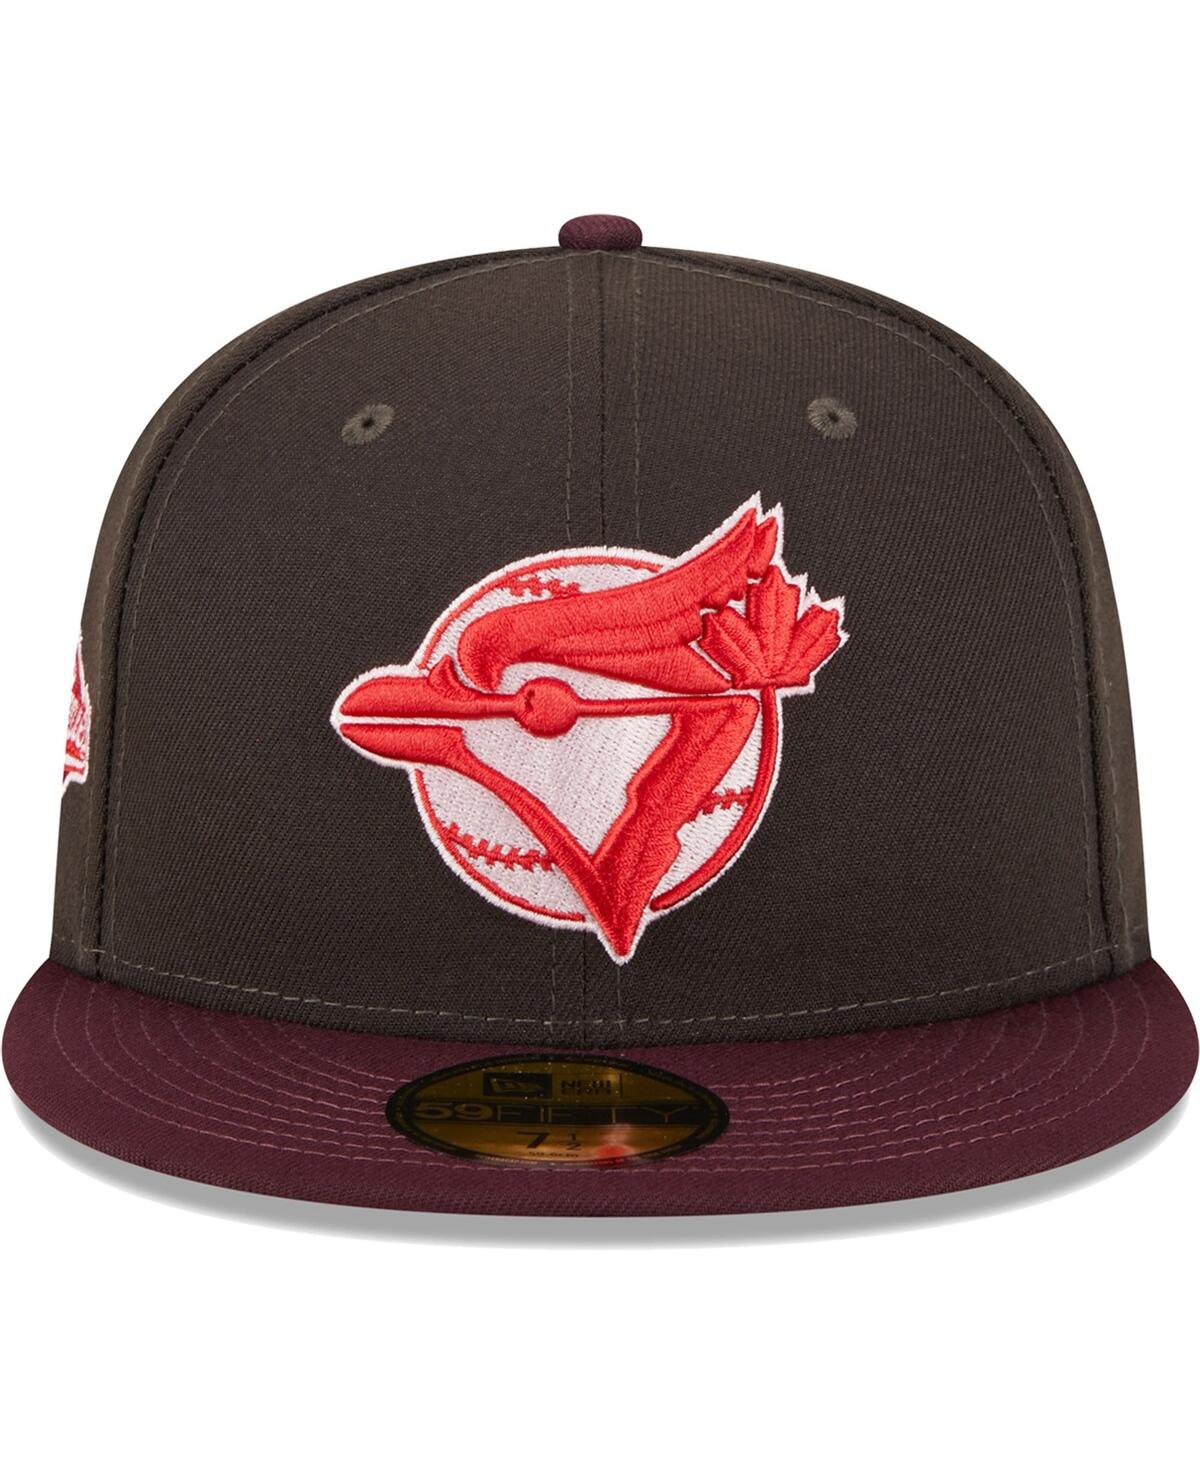 Men's New Era Brown/Maroon Toronto Blue Jays Chocolate Strawberry 59FIFTY Fitted Hat